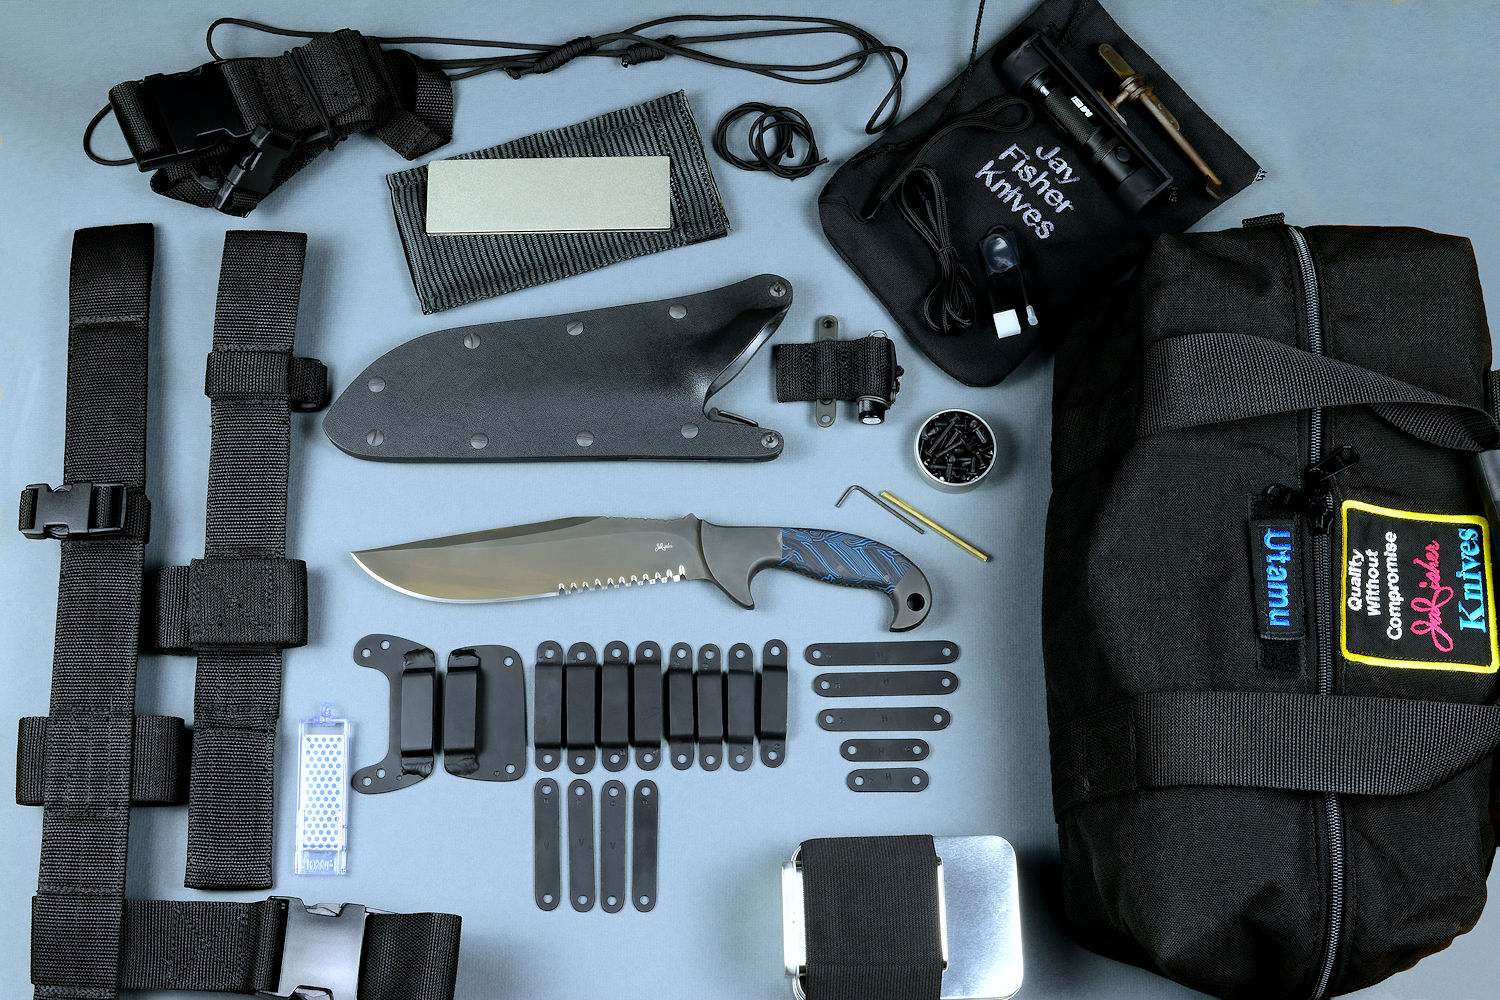 "Utamu" Custom Crossover, Survival, Tactial knife with full kit of accessories: multiple mounting straps and loops, HULA, LIMA, UBLX, EXBLX, Flashlights, hardware, sternum harness, sharpener, bags, storage, custom duffle